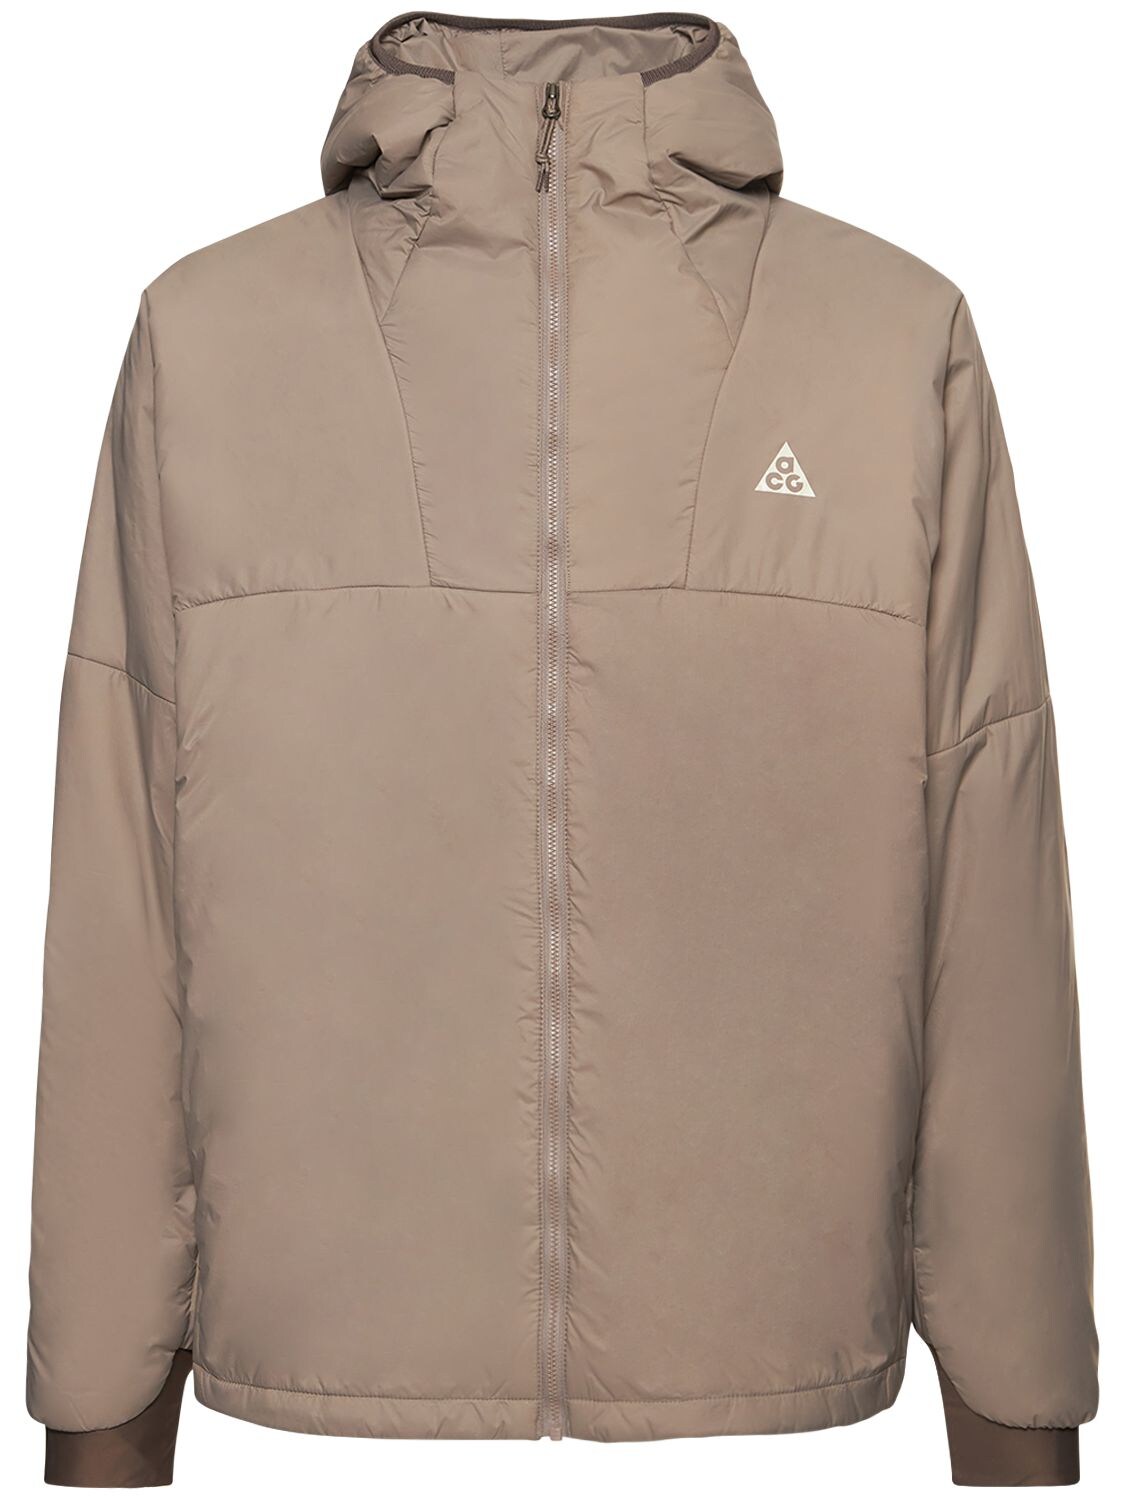 Nike Acg Therma-fit Insulated Jacket